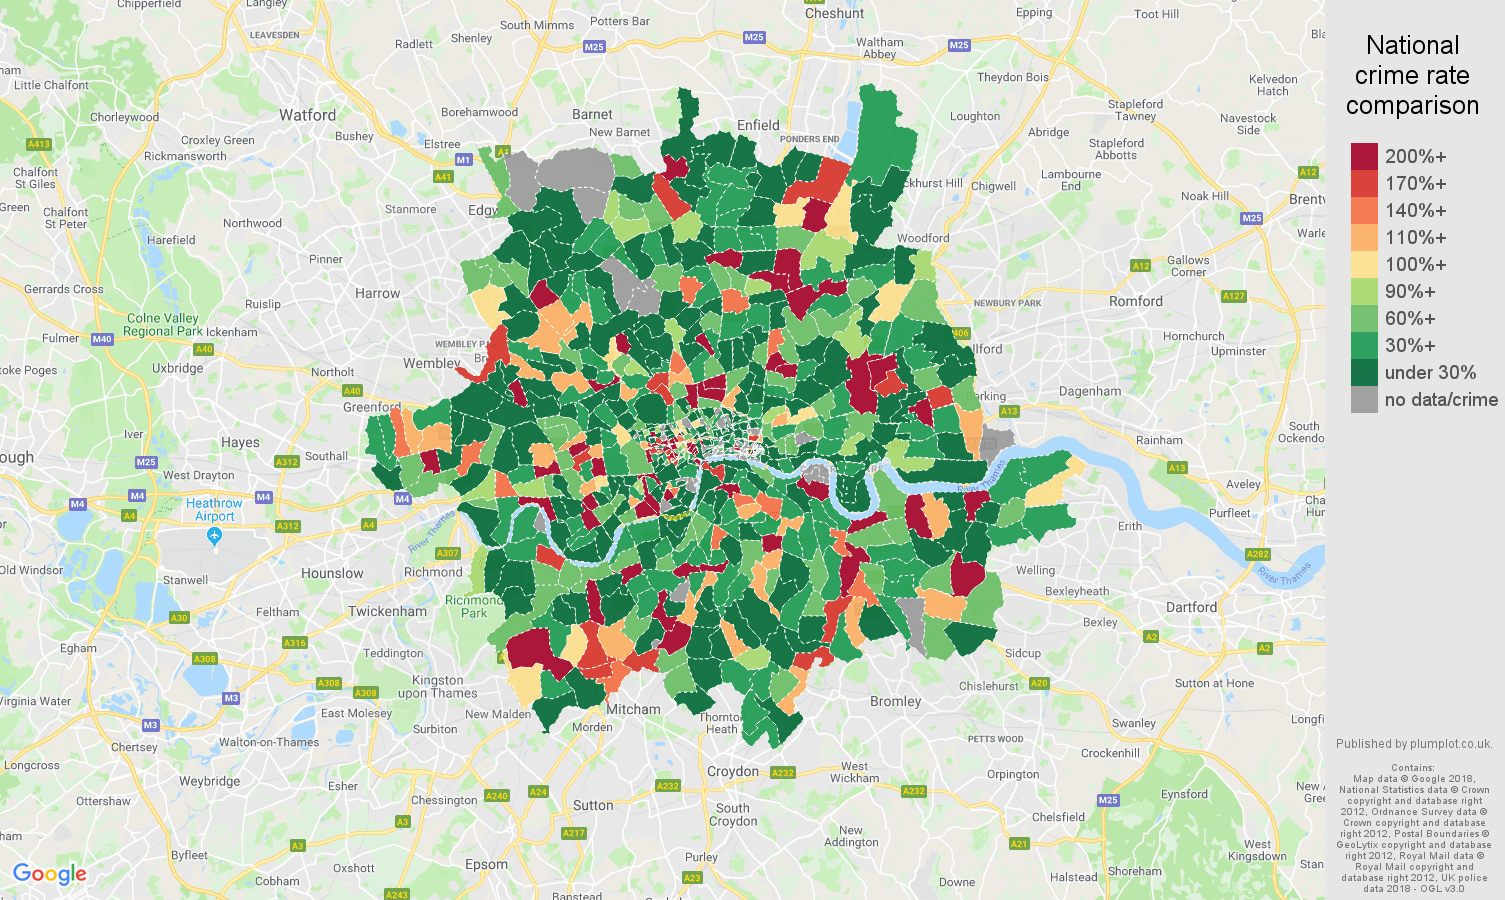 Inner London shoplifting crime rate comparison map